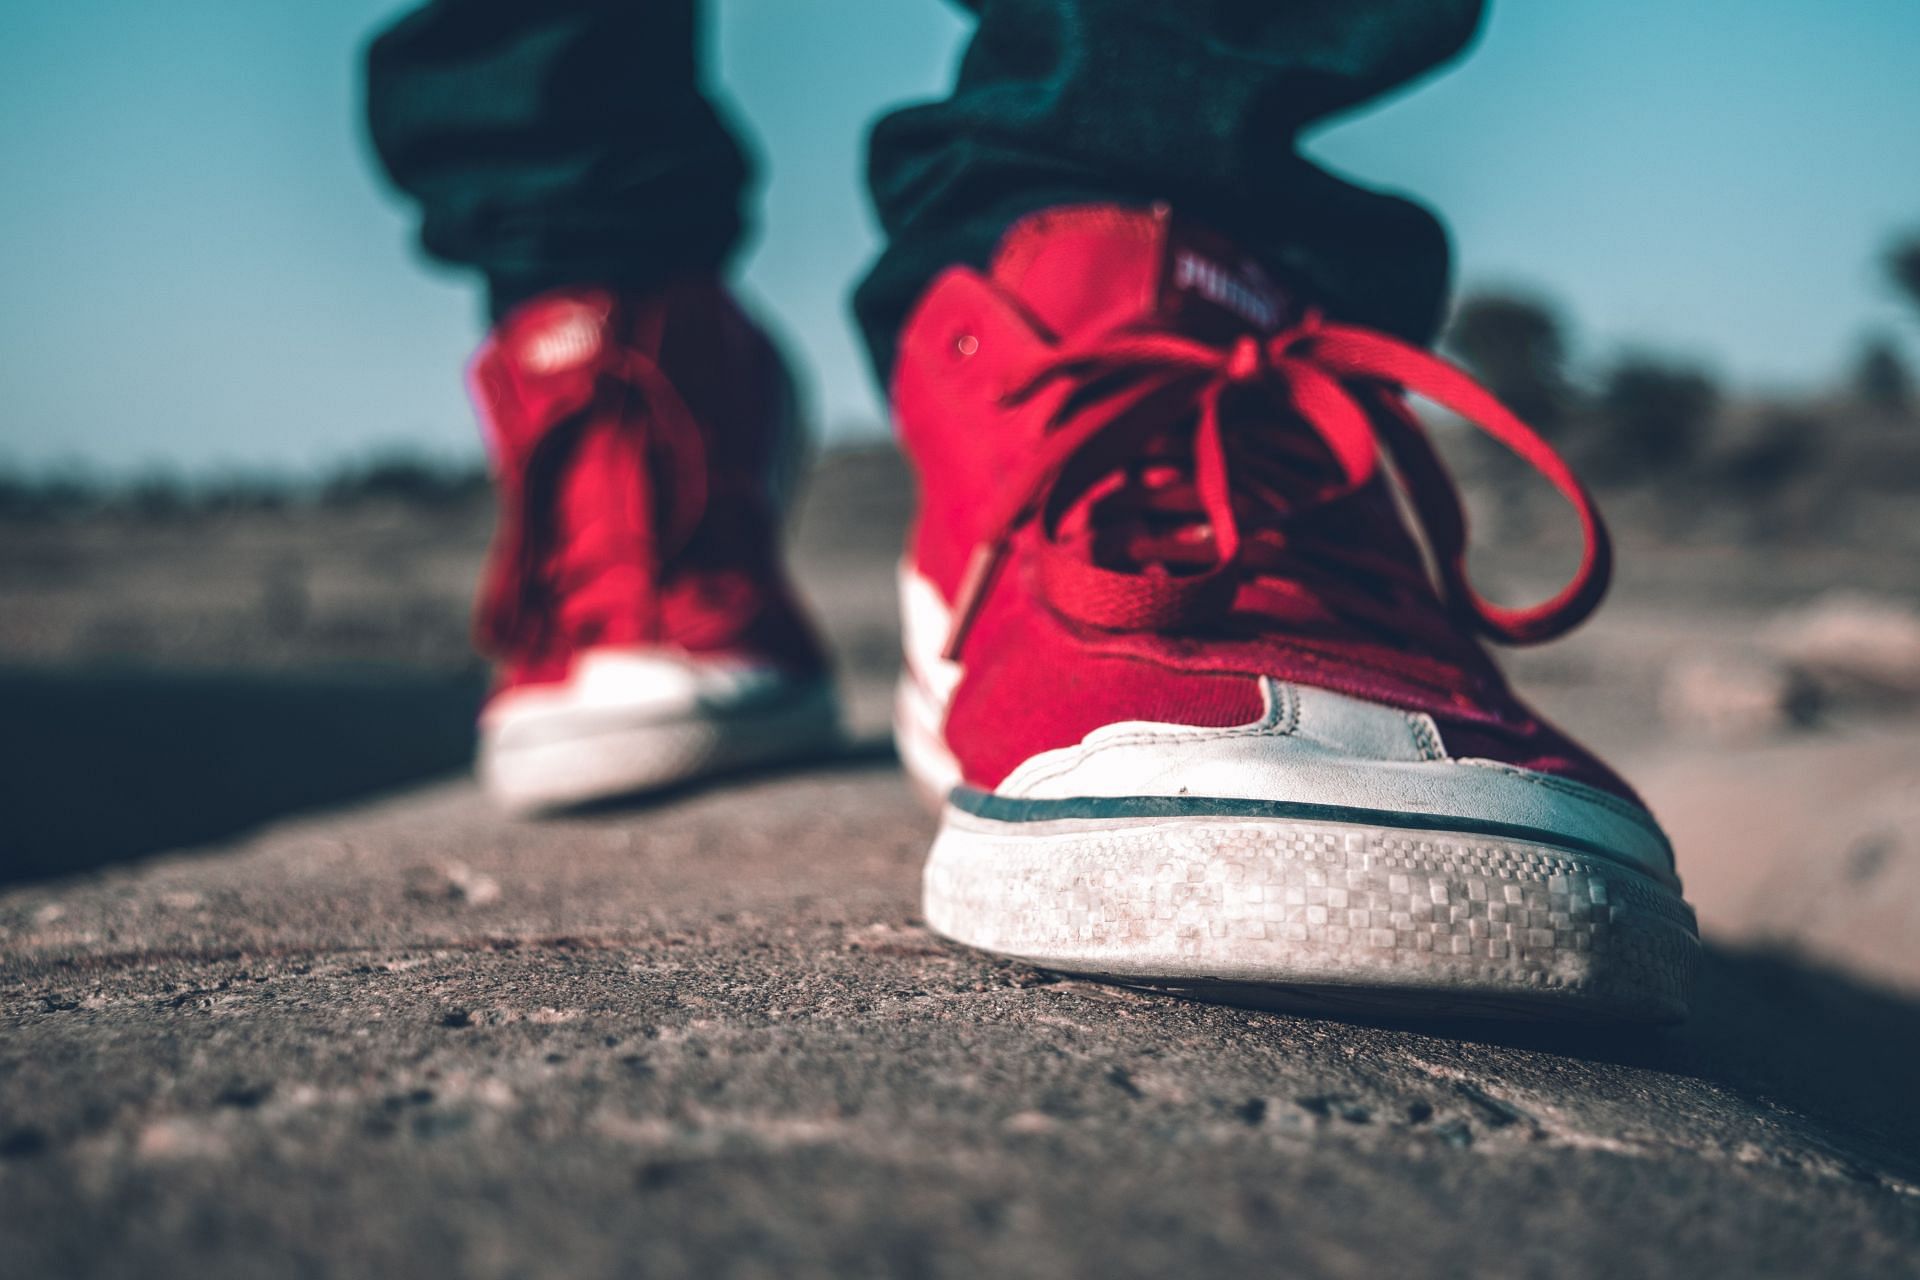 Walking shoes should be comfortable so that they dont hurt your feet or cause injuries (Image via Pexels @Ashutosh Sonwani)